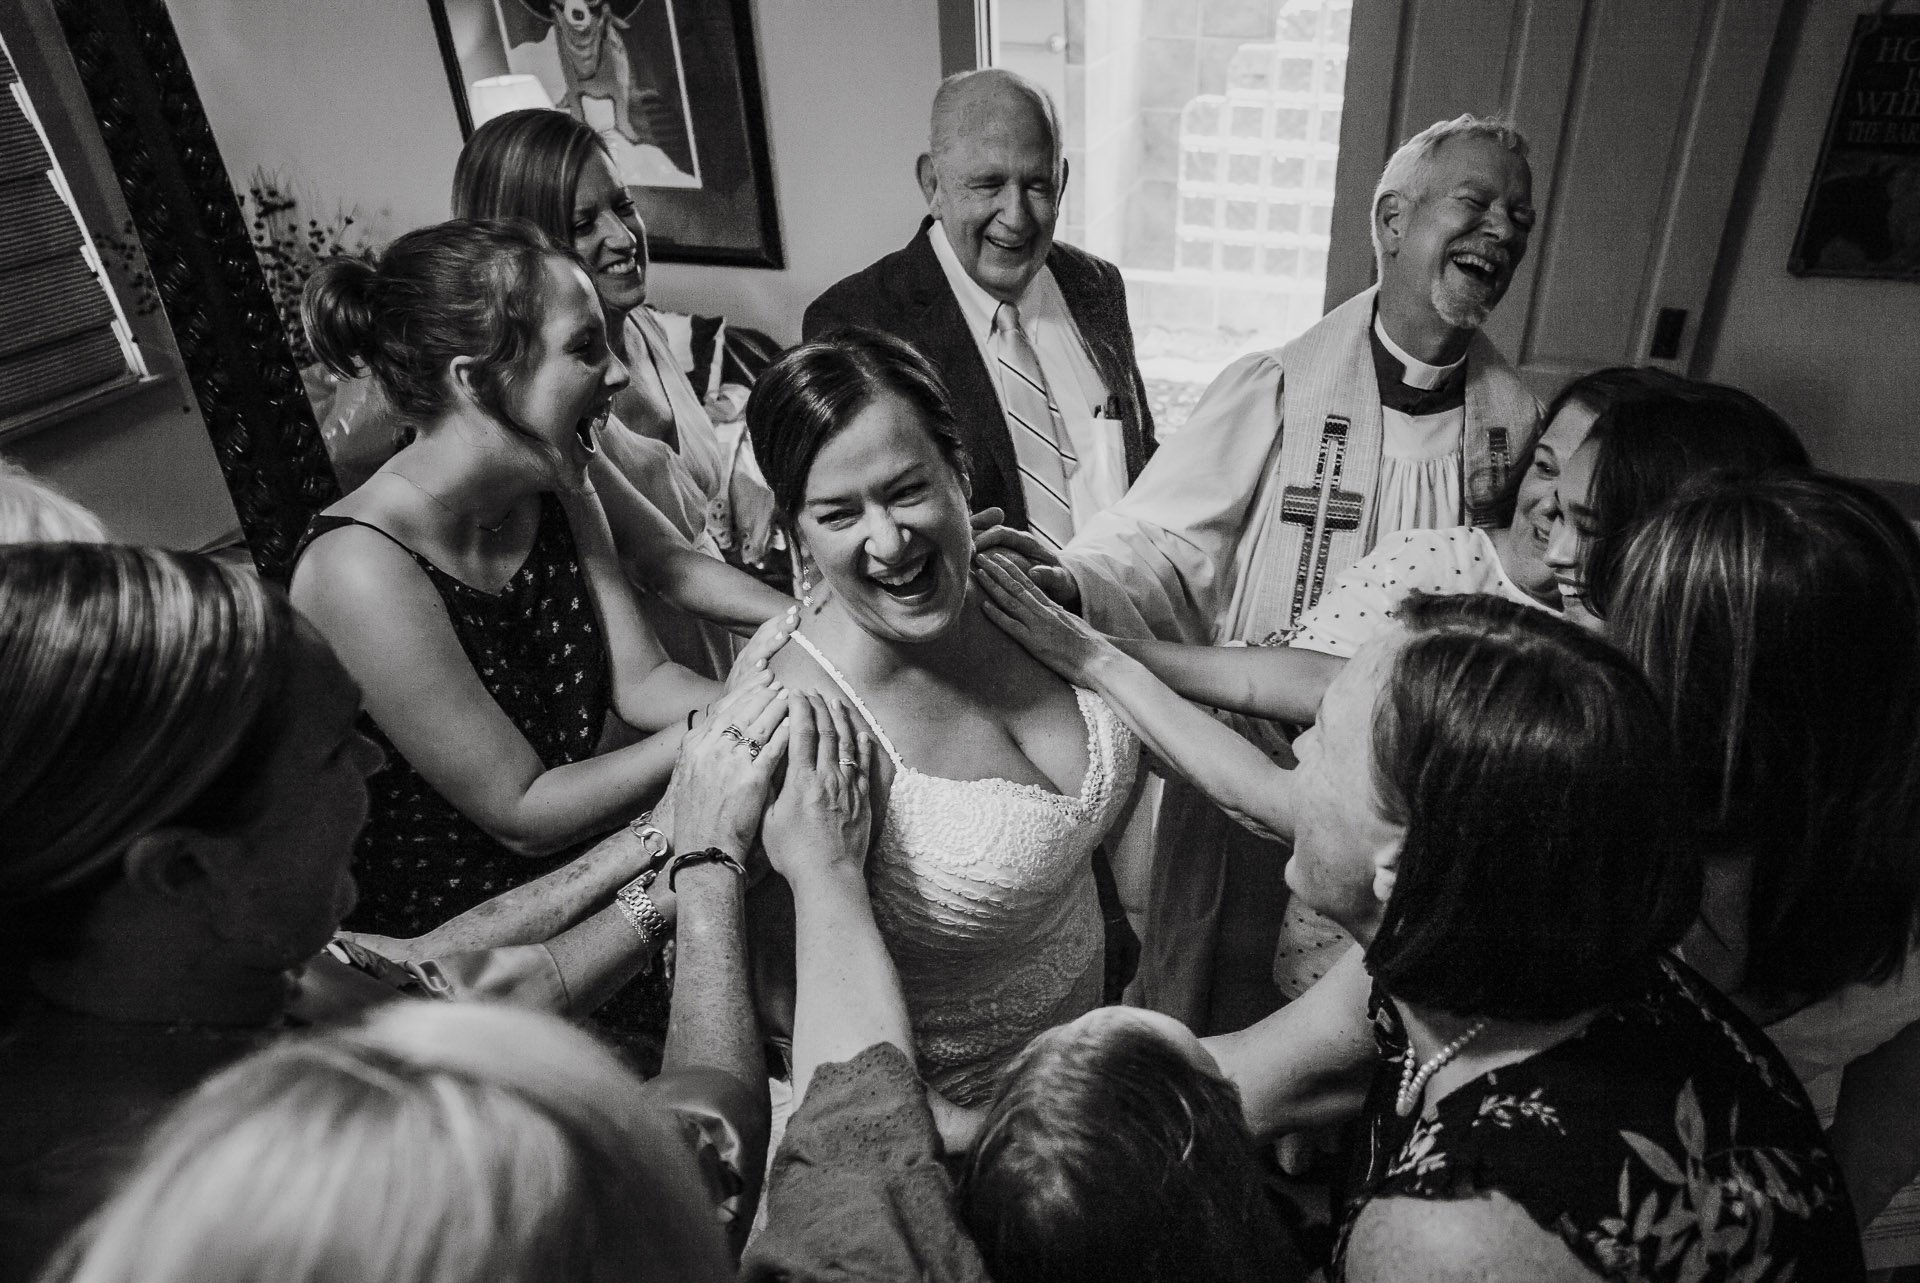 Joyous reaction as bride is surrounded by family and friends